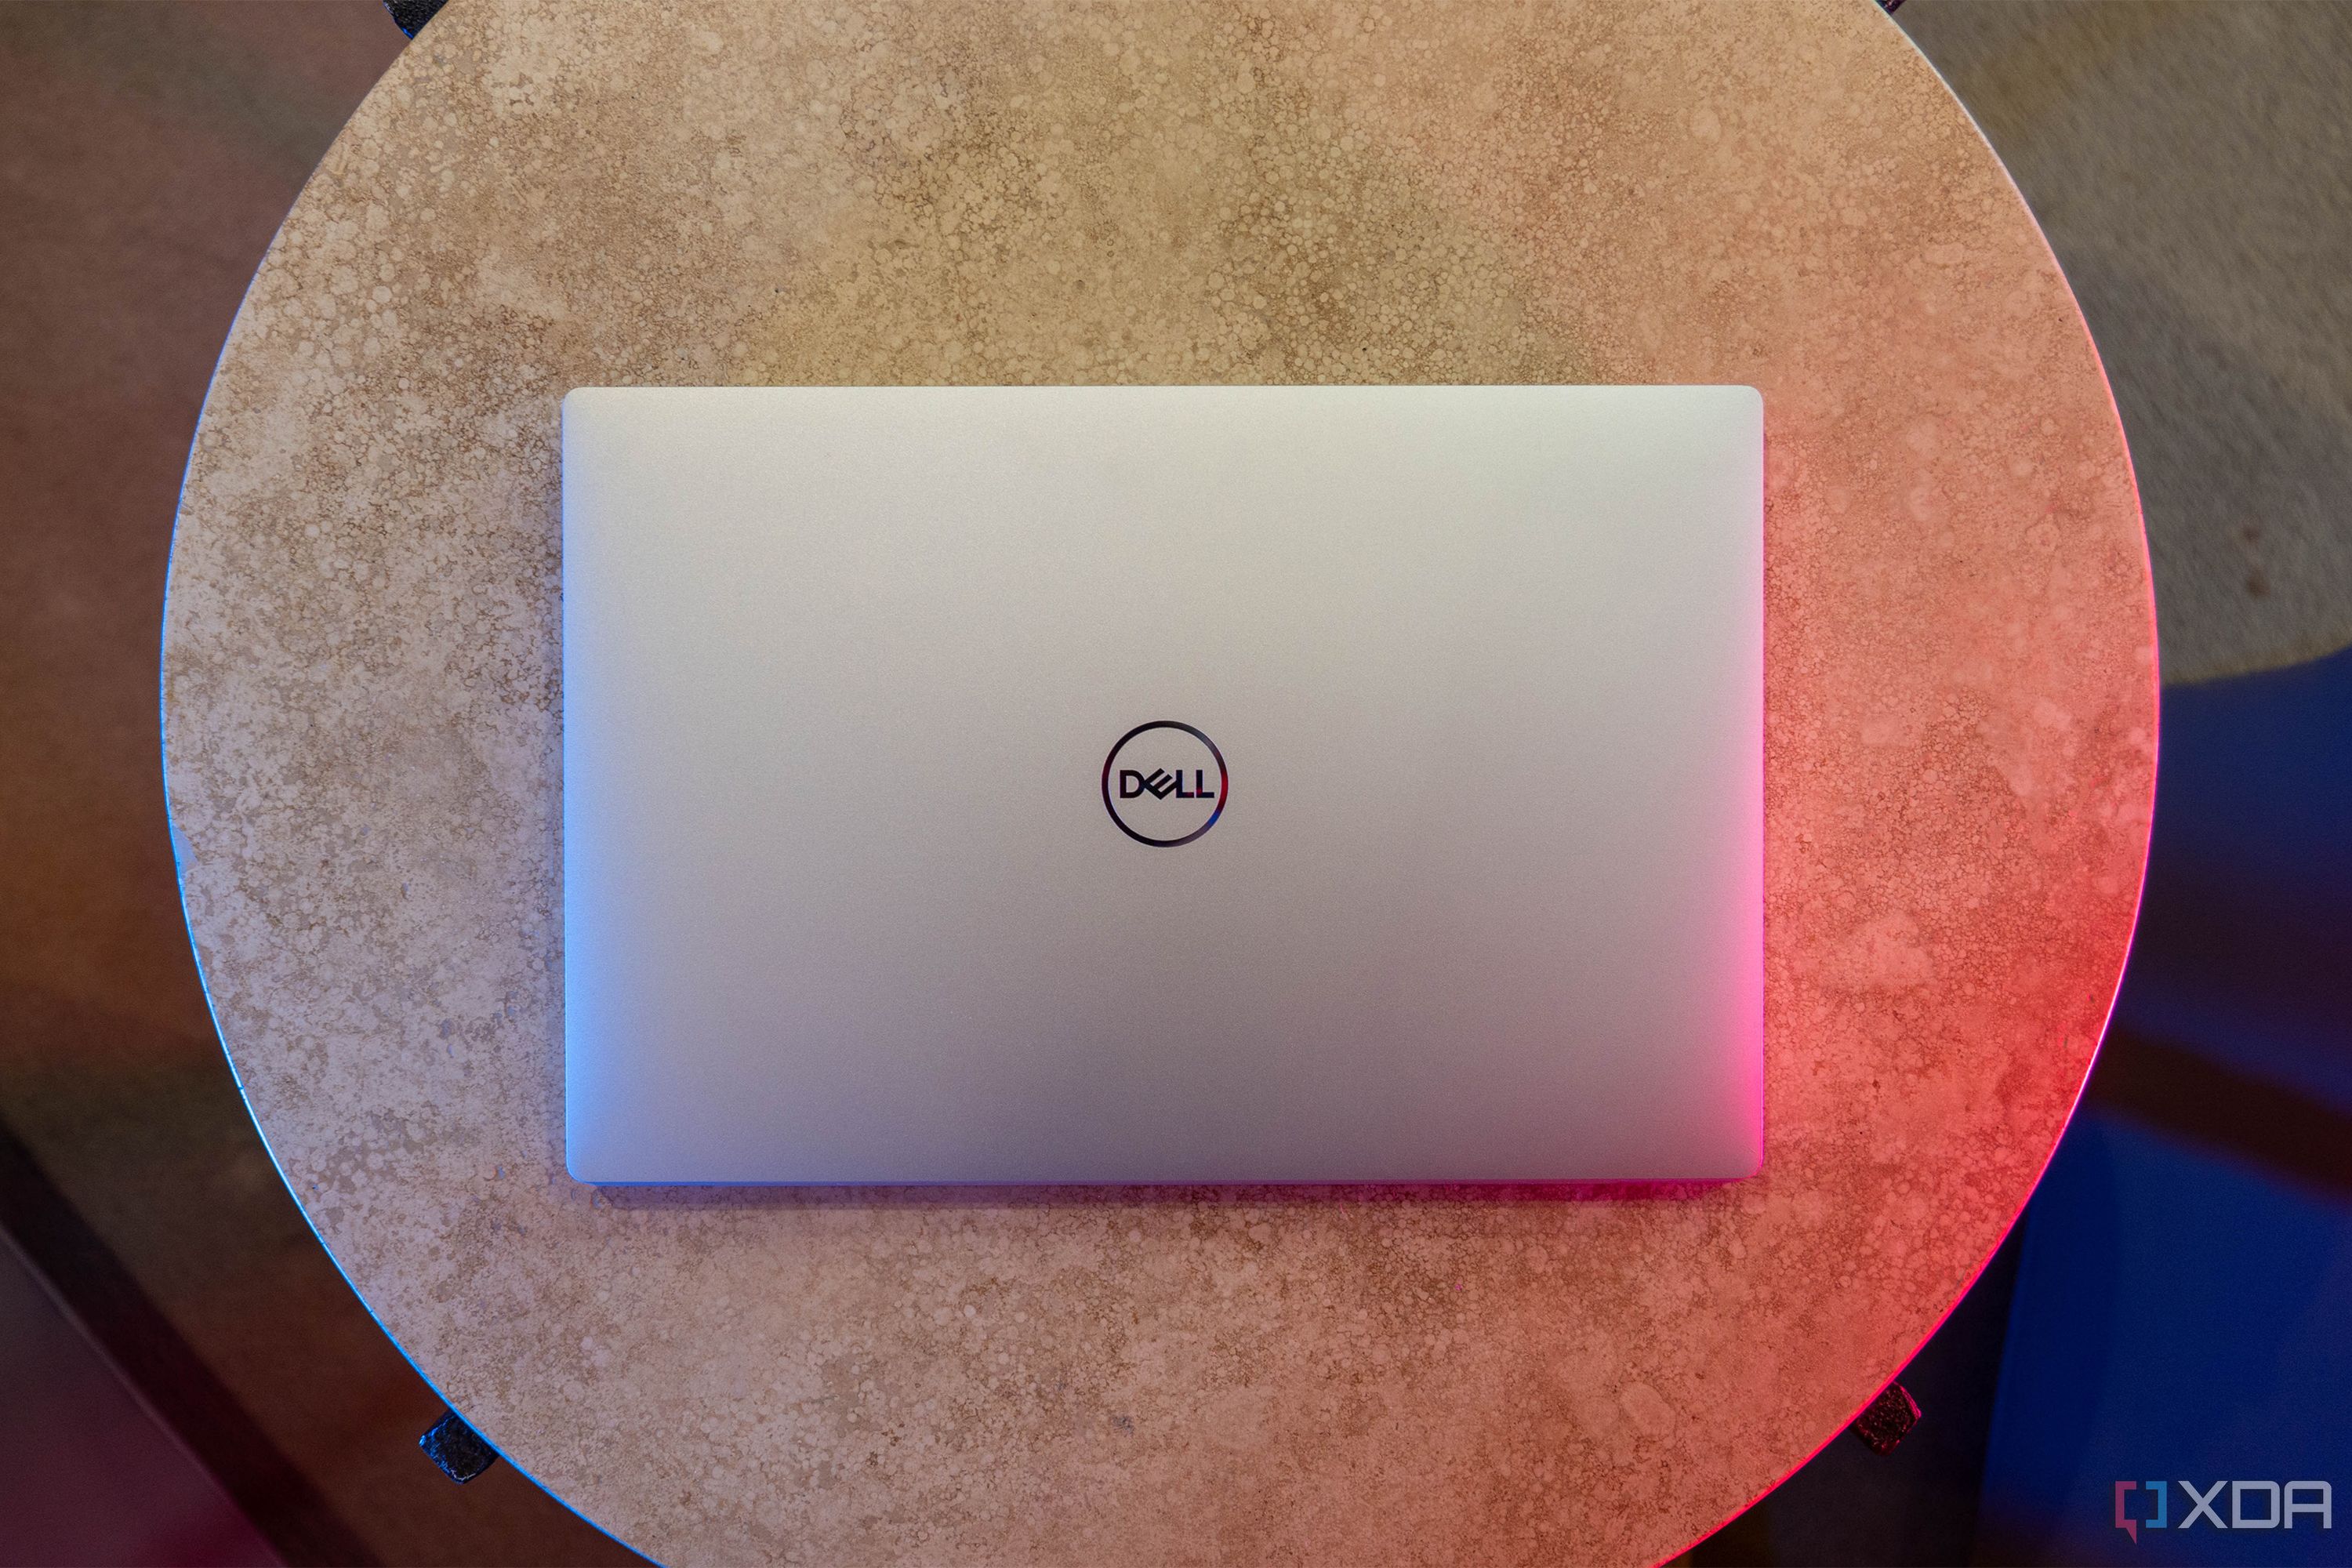 Top down view of metal Dell laptop